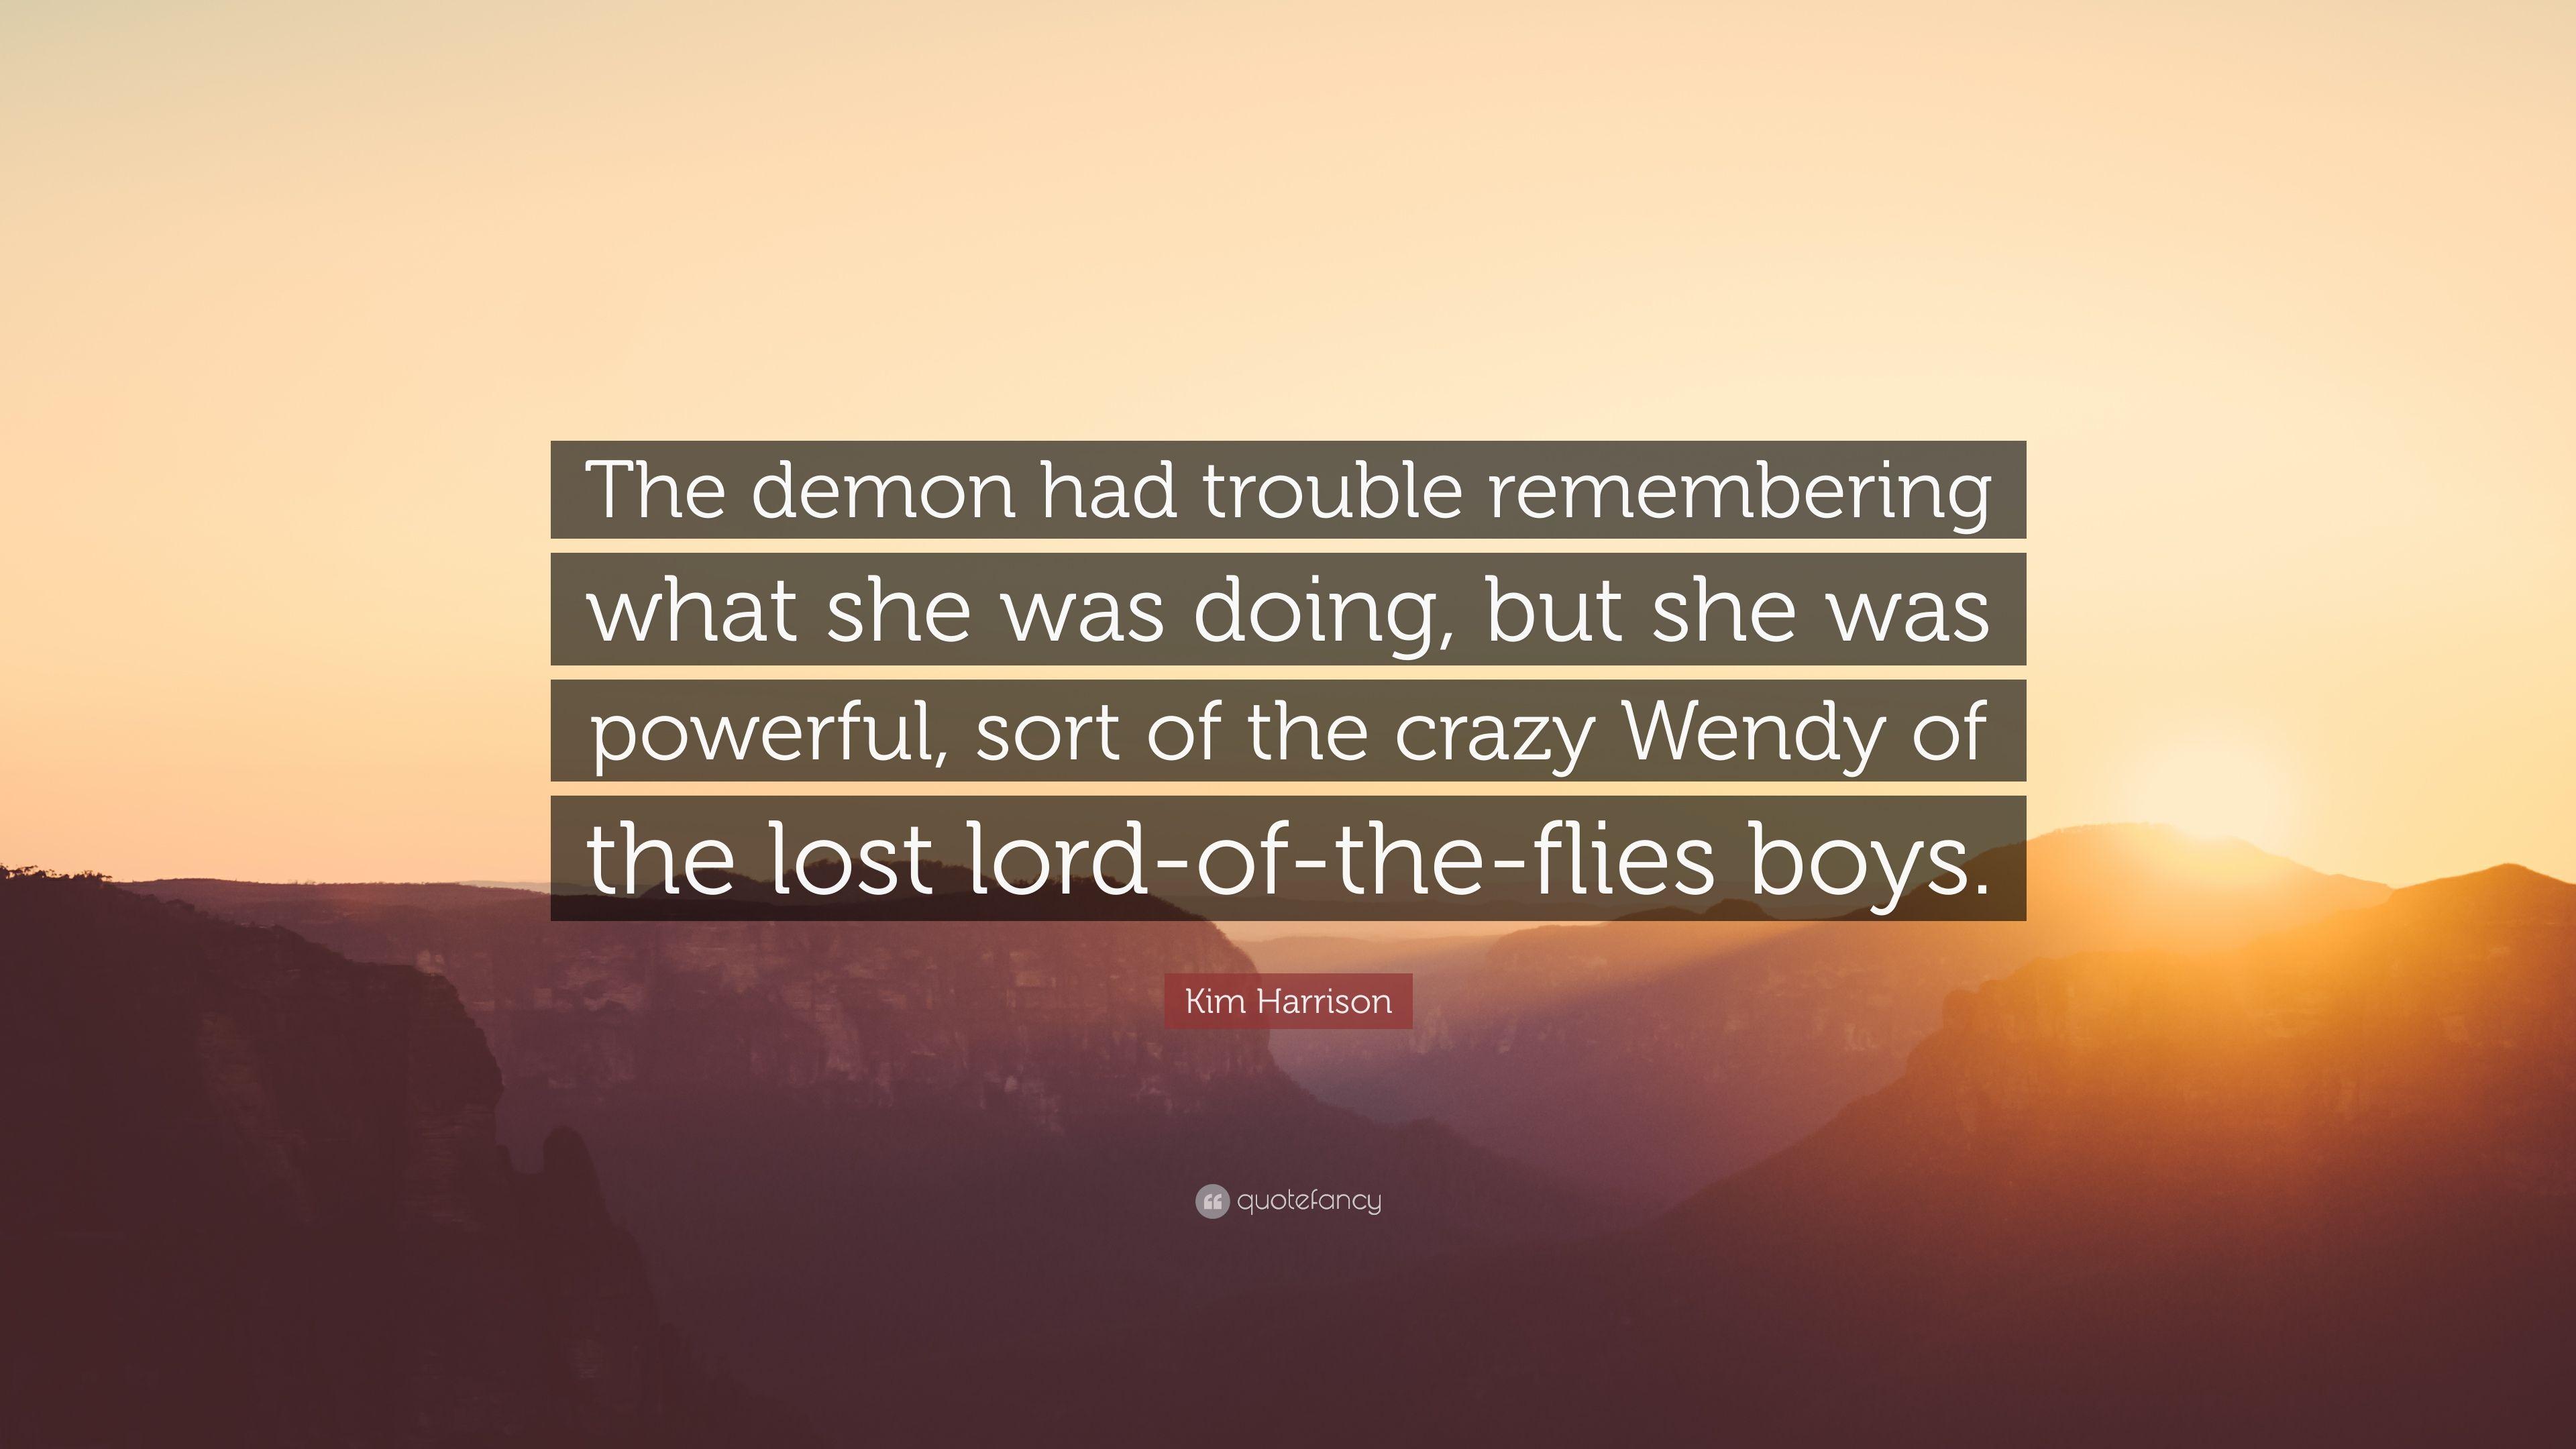 Kim Harrison Quote: “The demon had trouble remembering what she